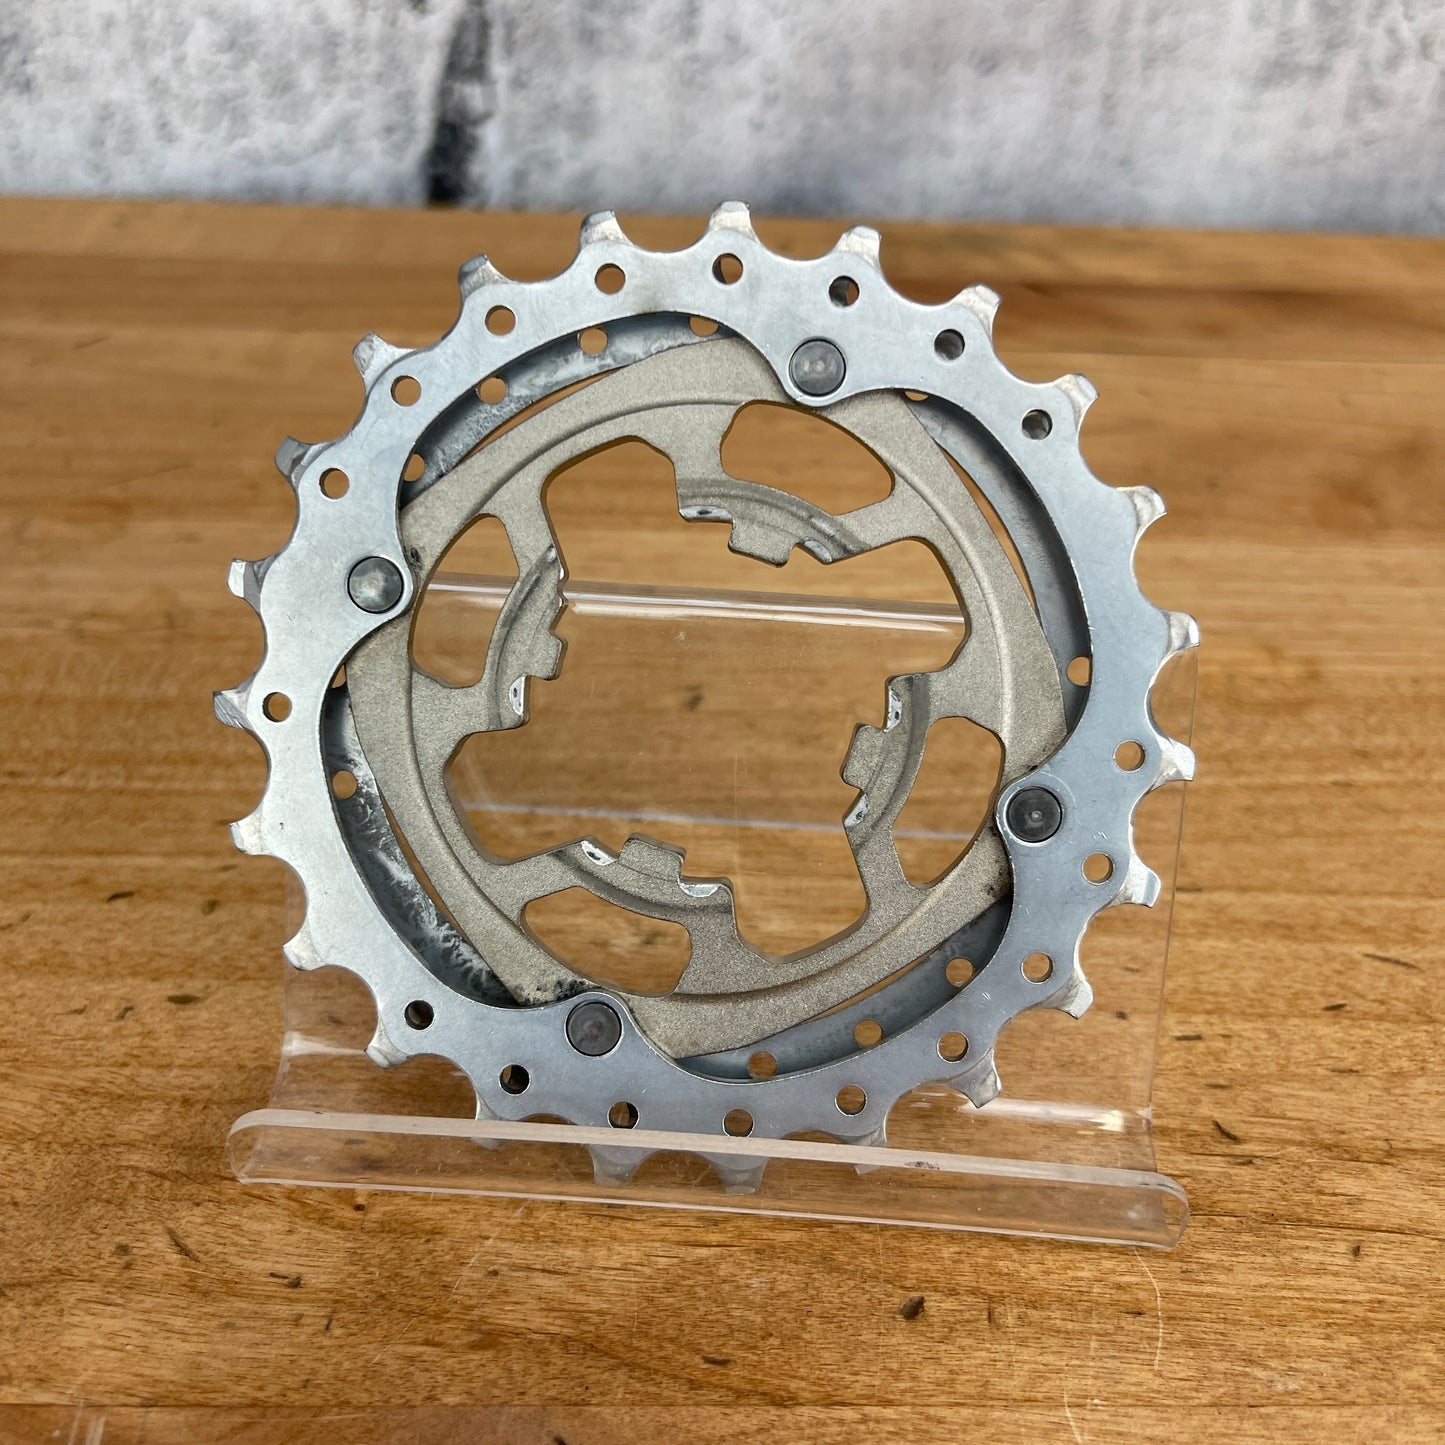 Campagnolo Chorus Ultra Drive 10-Speed 21/23t Cassette Sprocket